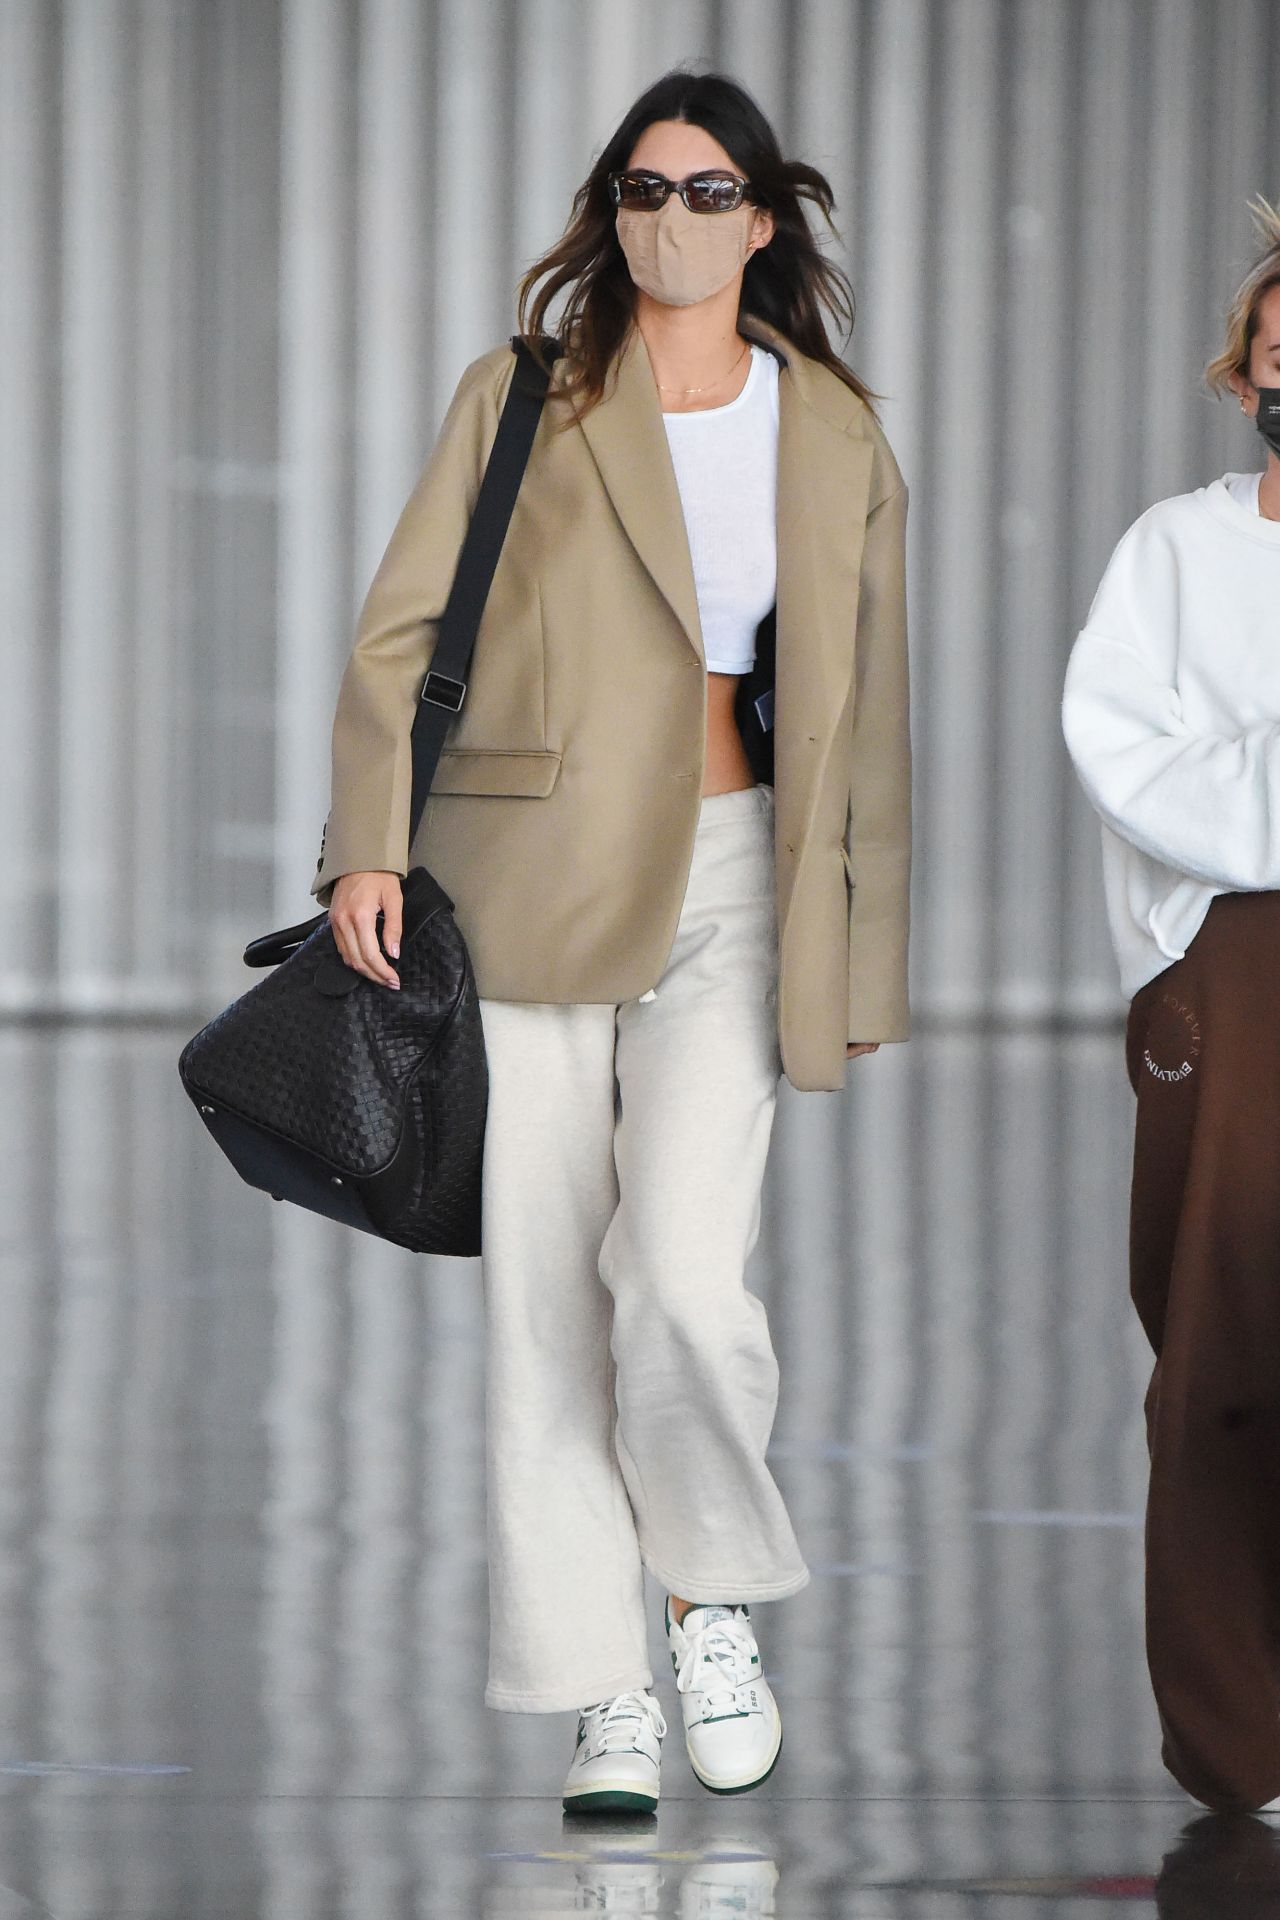 kendall-jenner-at-jfk-airport-in-new-york-07-01-2016_4